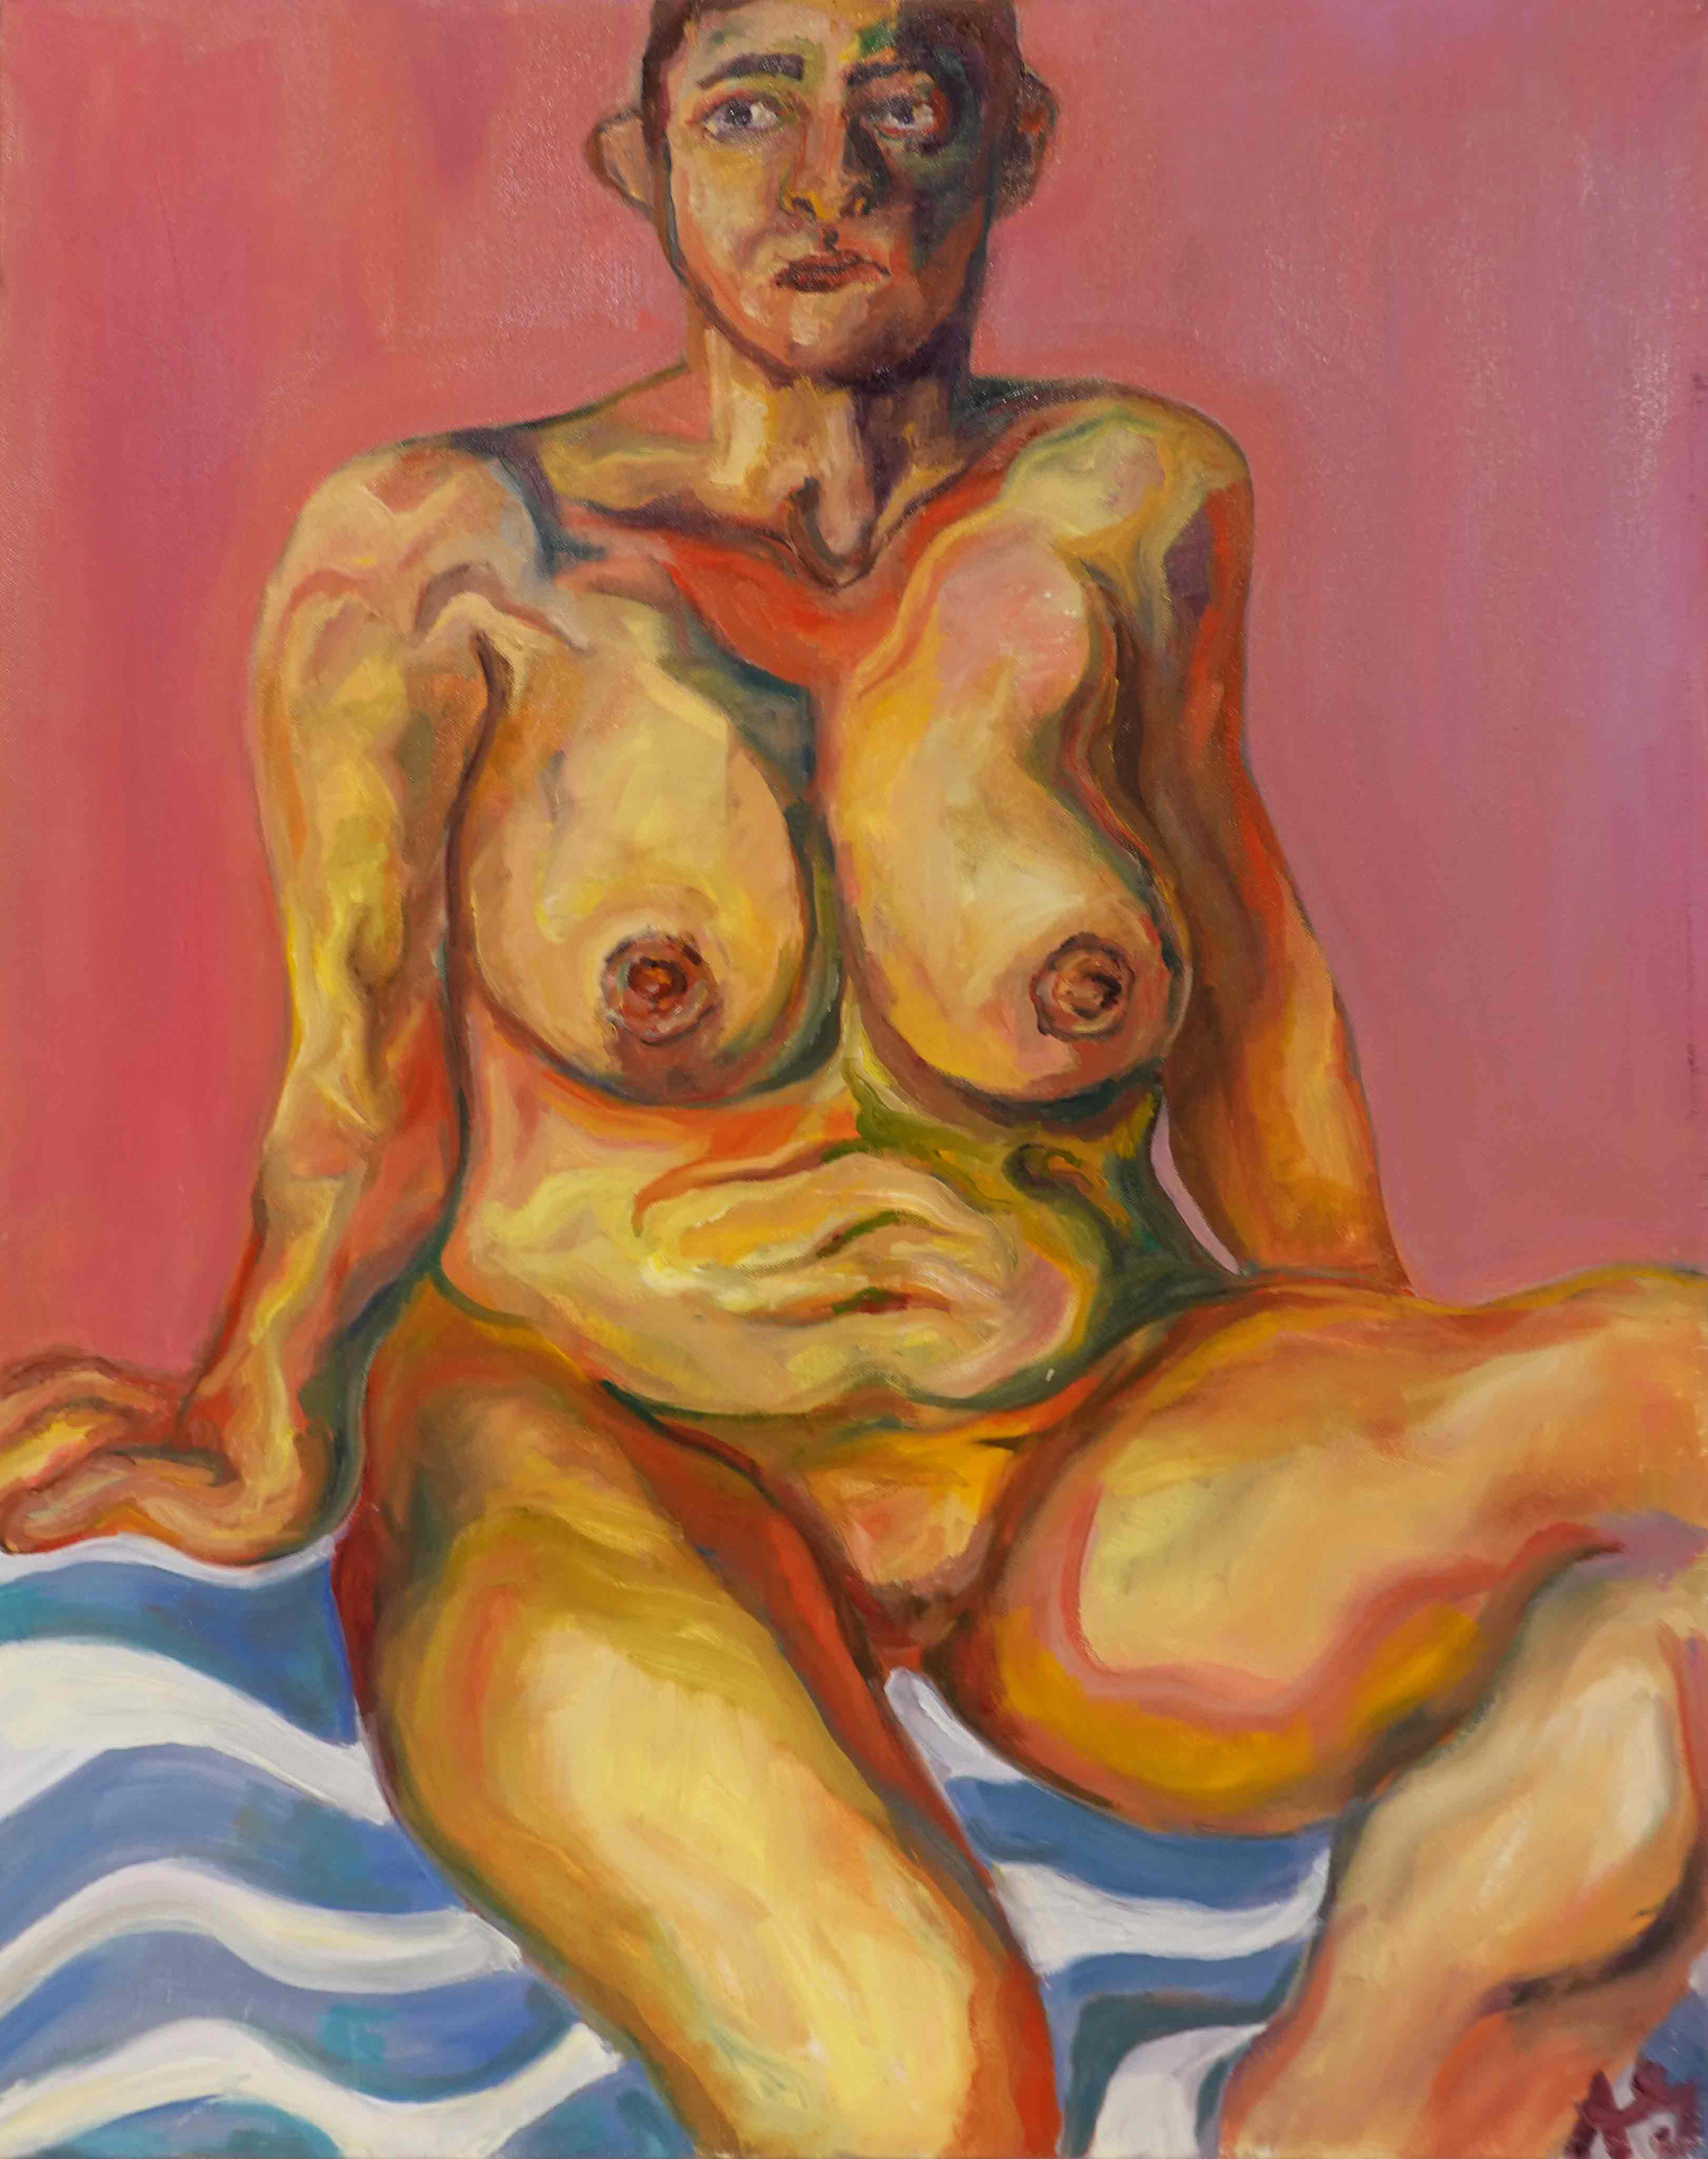 A painted portrait of a nude woman